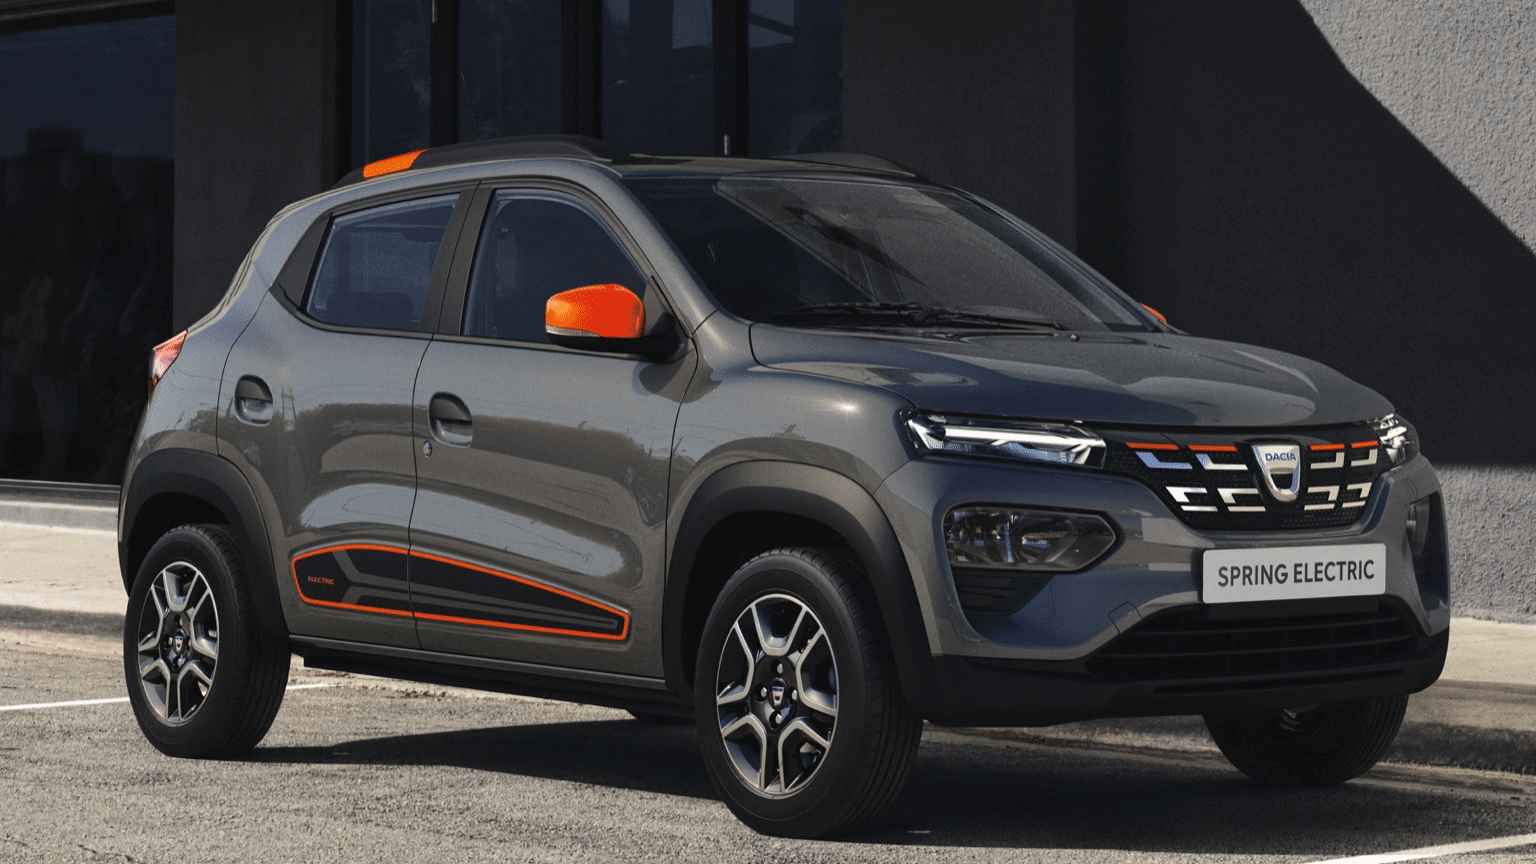 When To Expect Launch Of Dacia Spring In The UK? - Shrink That Footprint